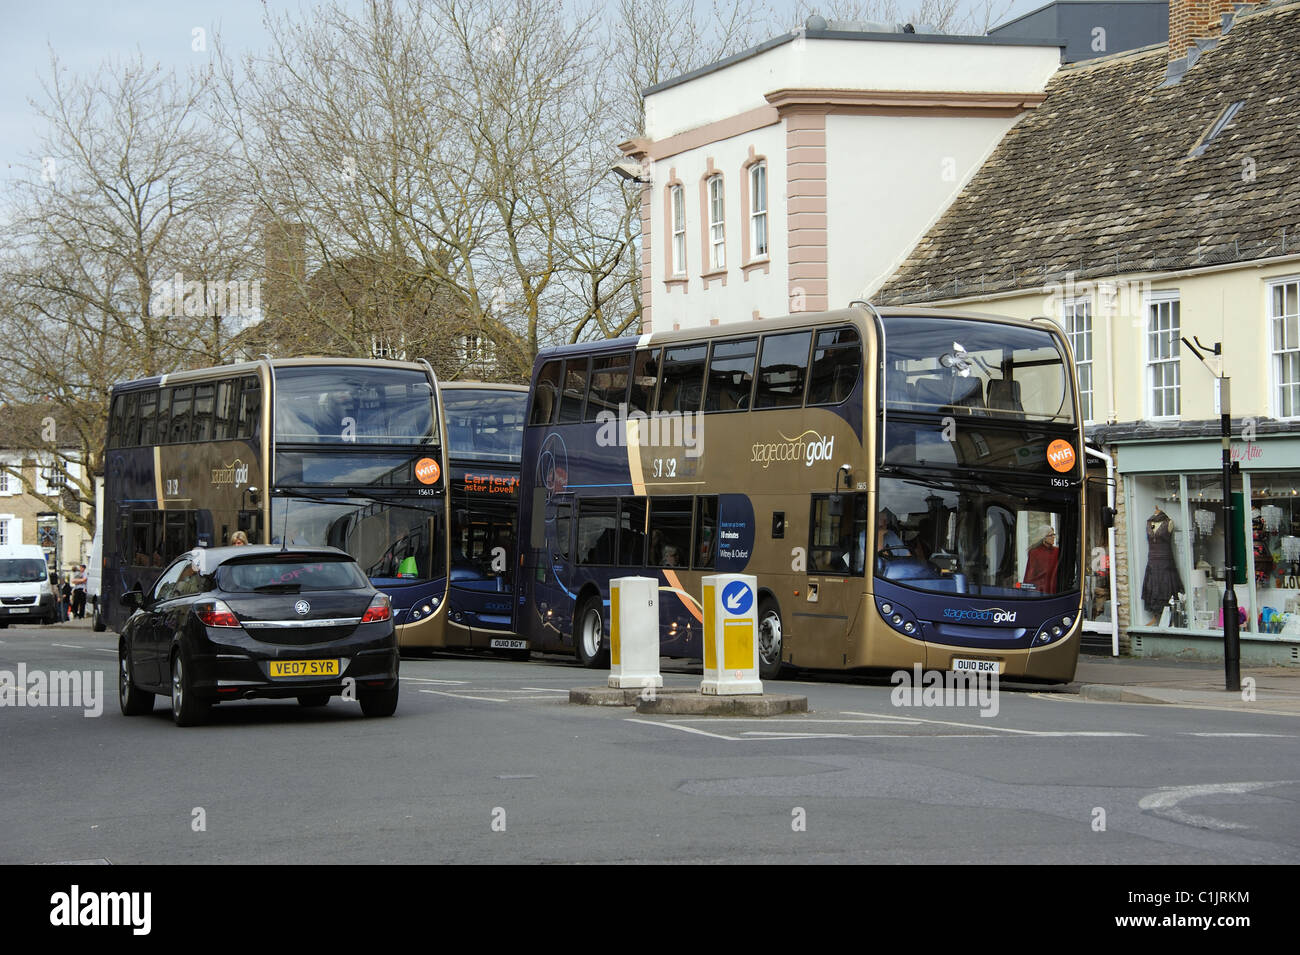 Stagecoach Gold company double decker buses in Witney town centre Oxfordshire England UK The new buses were introduced in March Stock Photo